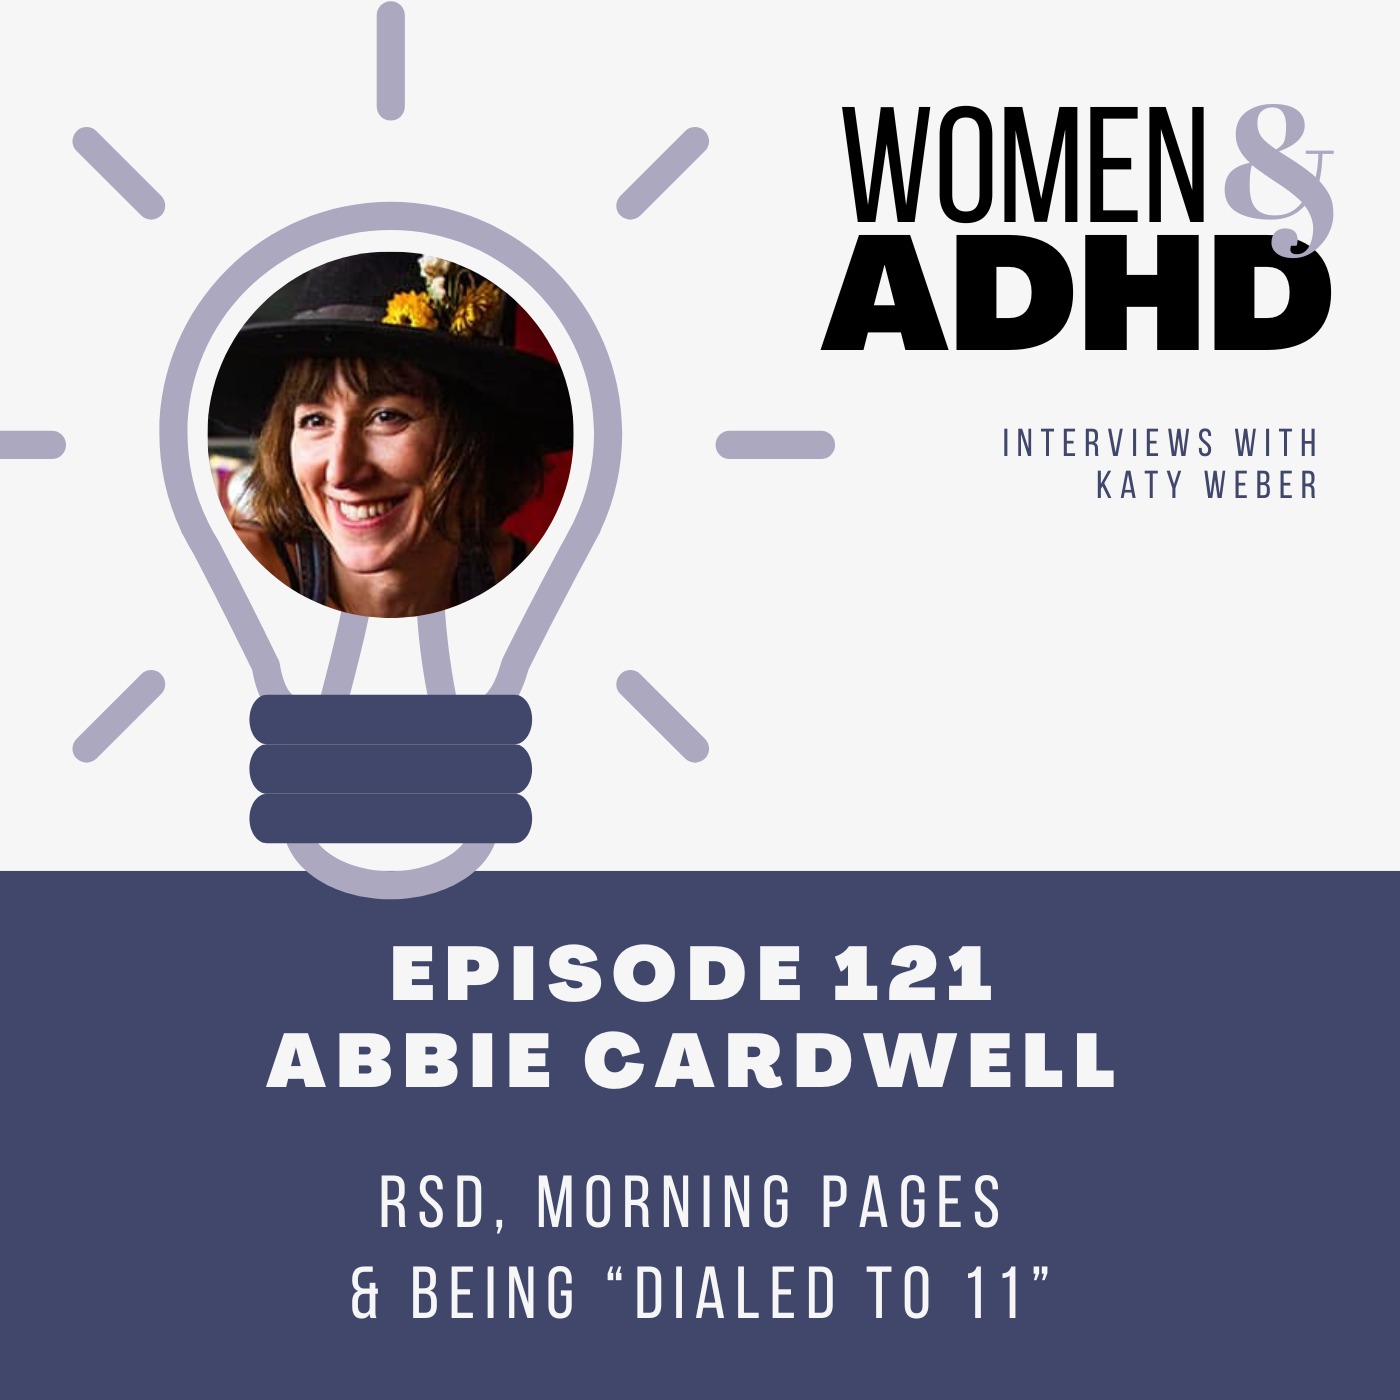 Abbie Cardwell: RSD, Morning Pages & being “dialed to 11”